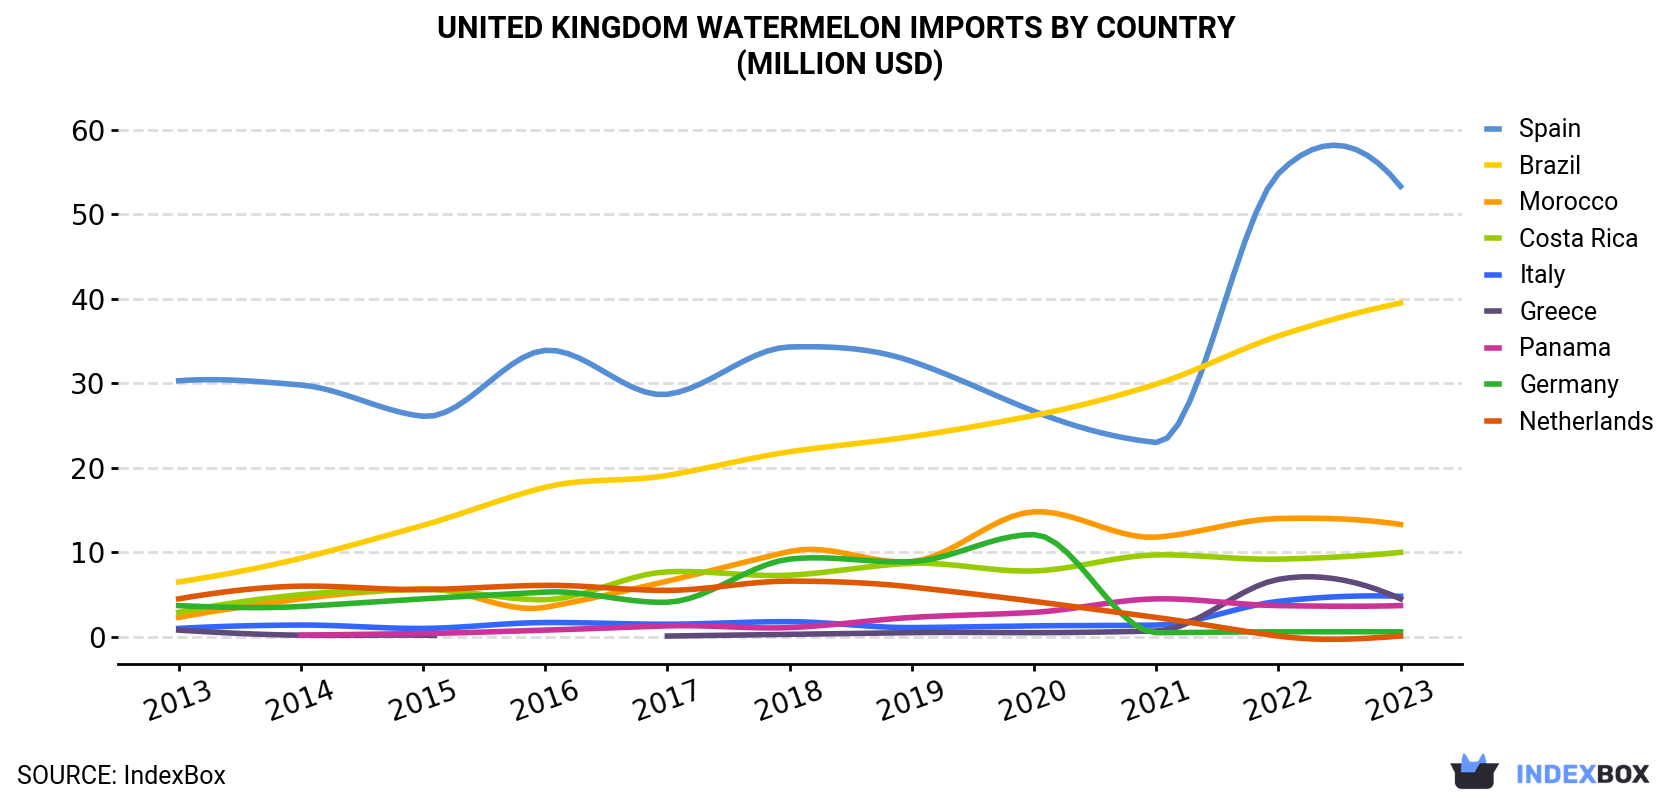 United Kingdom Watermelon Imports By Country (Million USD)